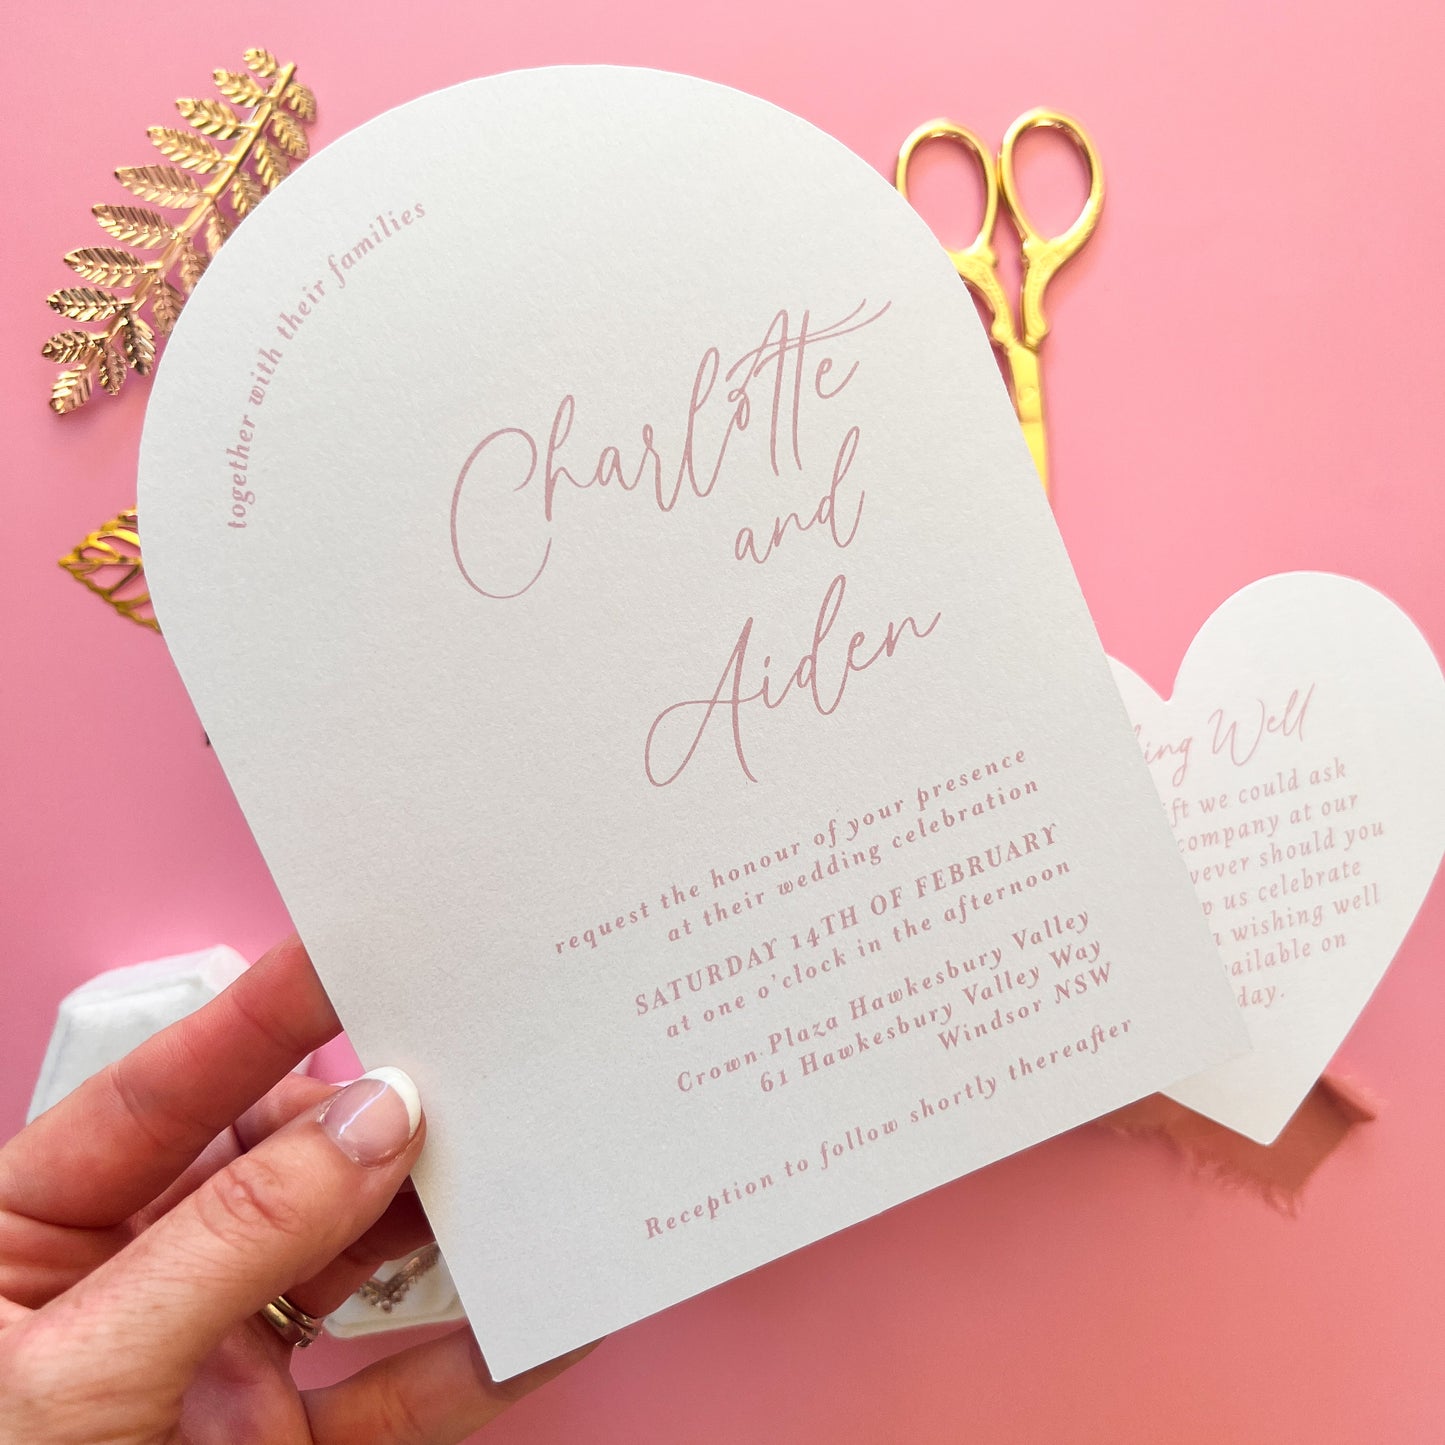 Arch and heart shaped printed wedding invitation dusty pink and white